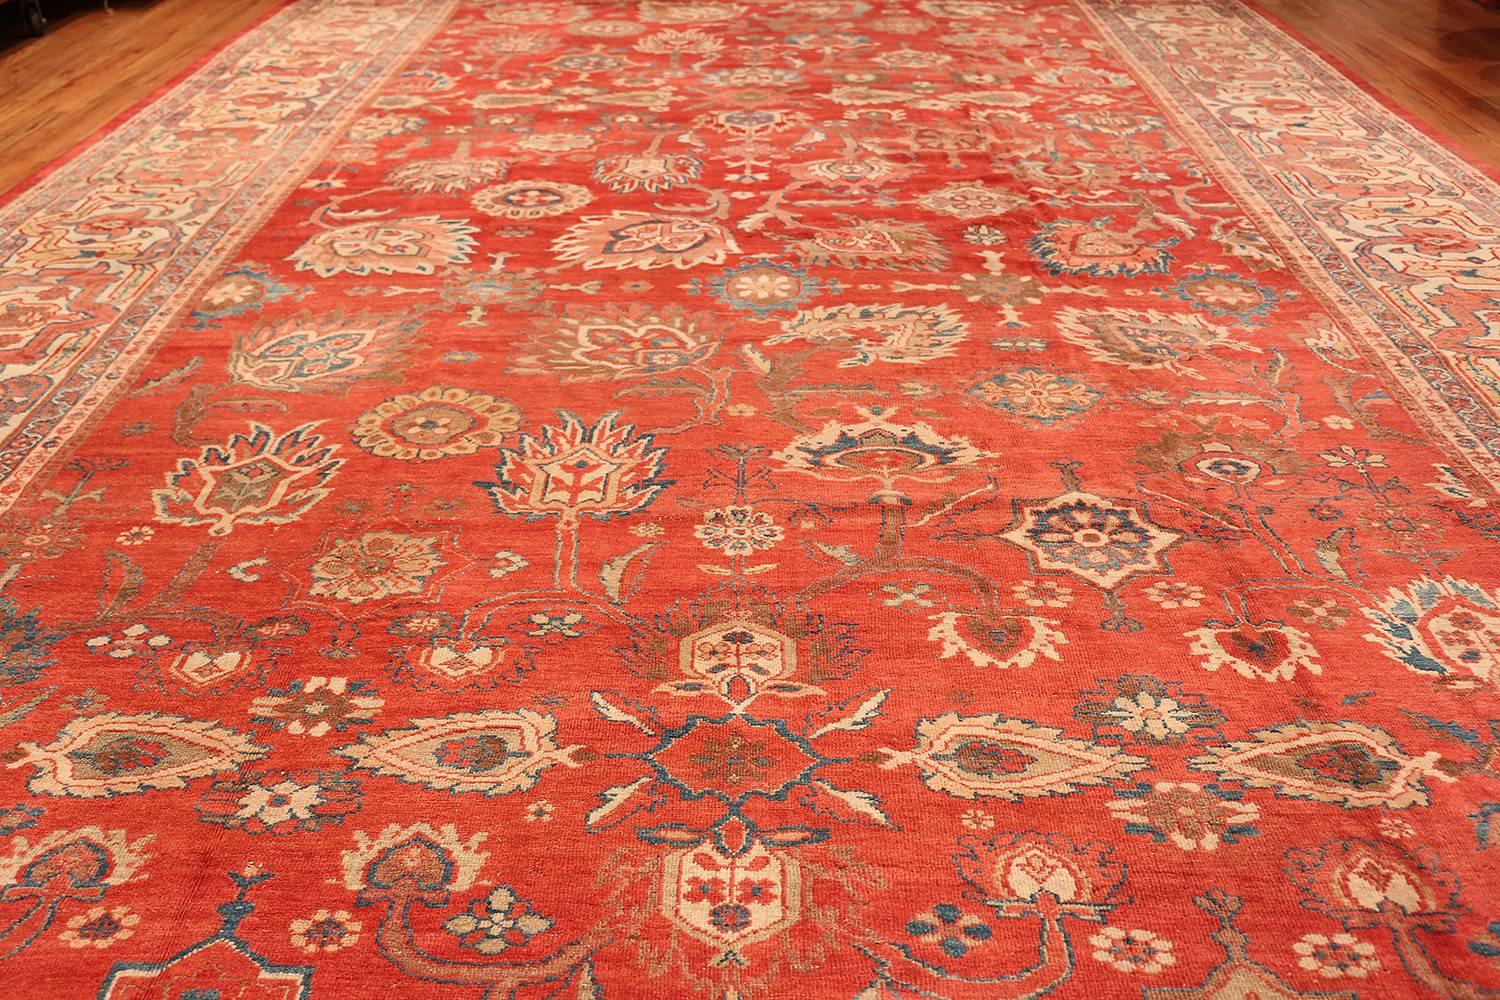 Hand-Knotted Largw Oversize Red Antique Persian Sultanabad Rug. Size: 14 ft x 21 ft